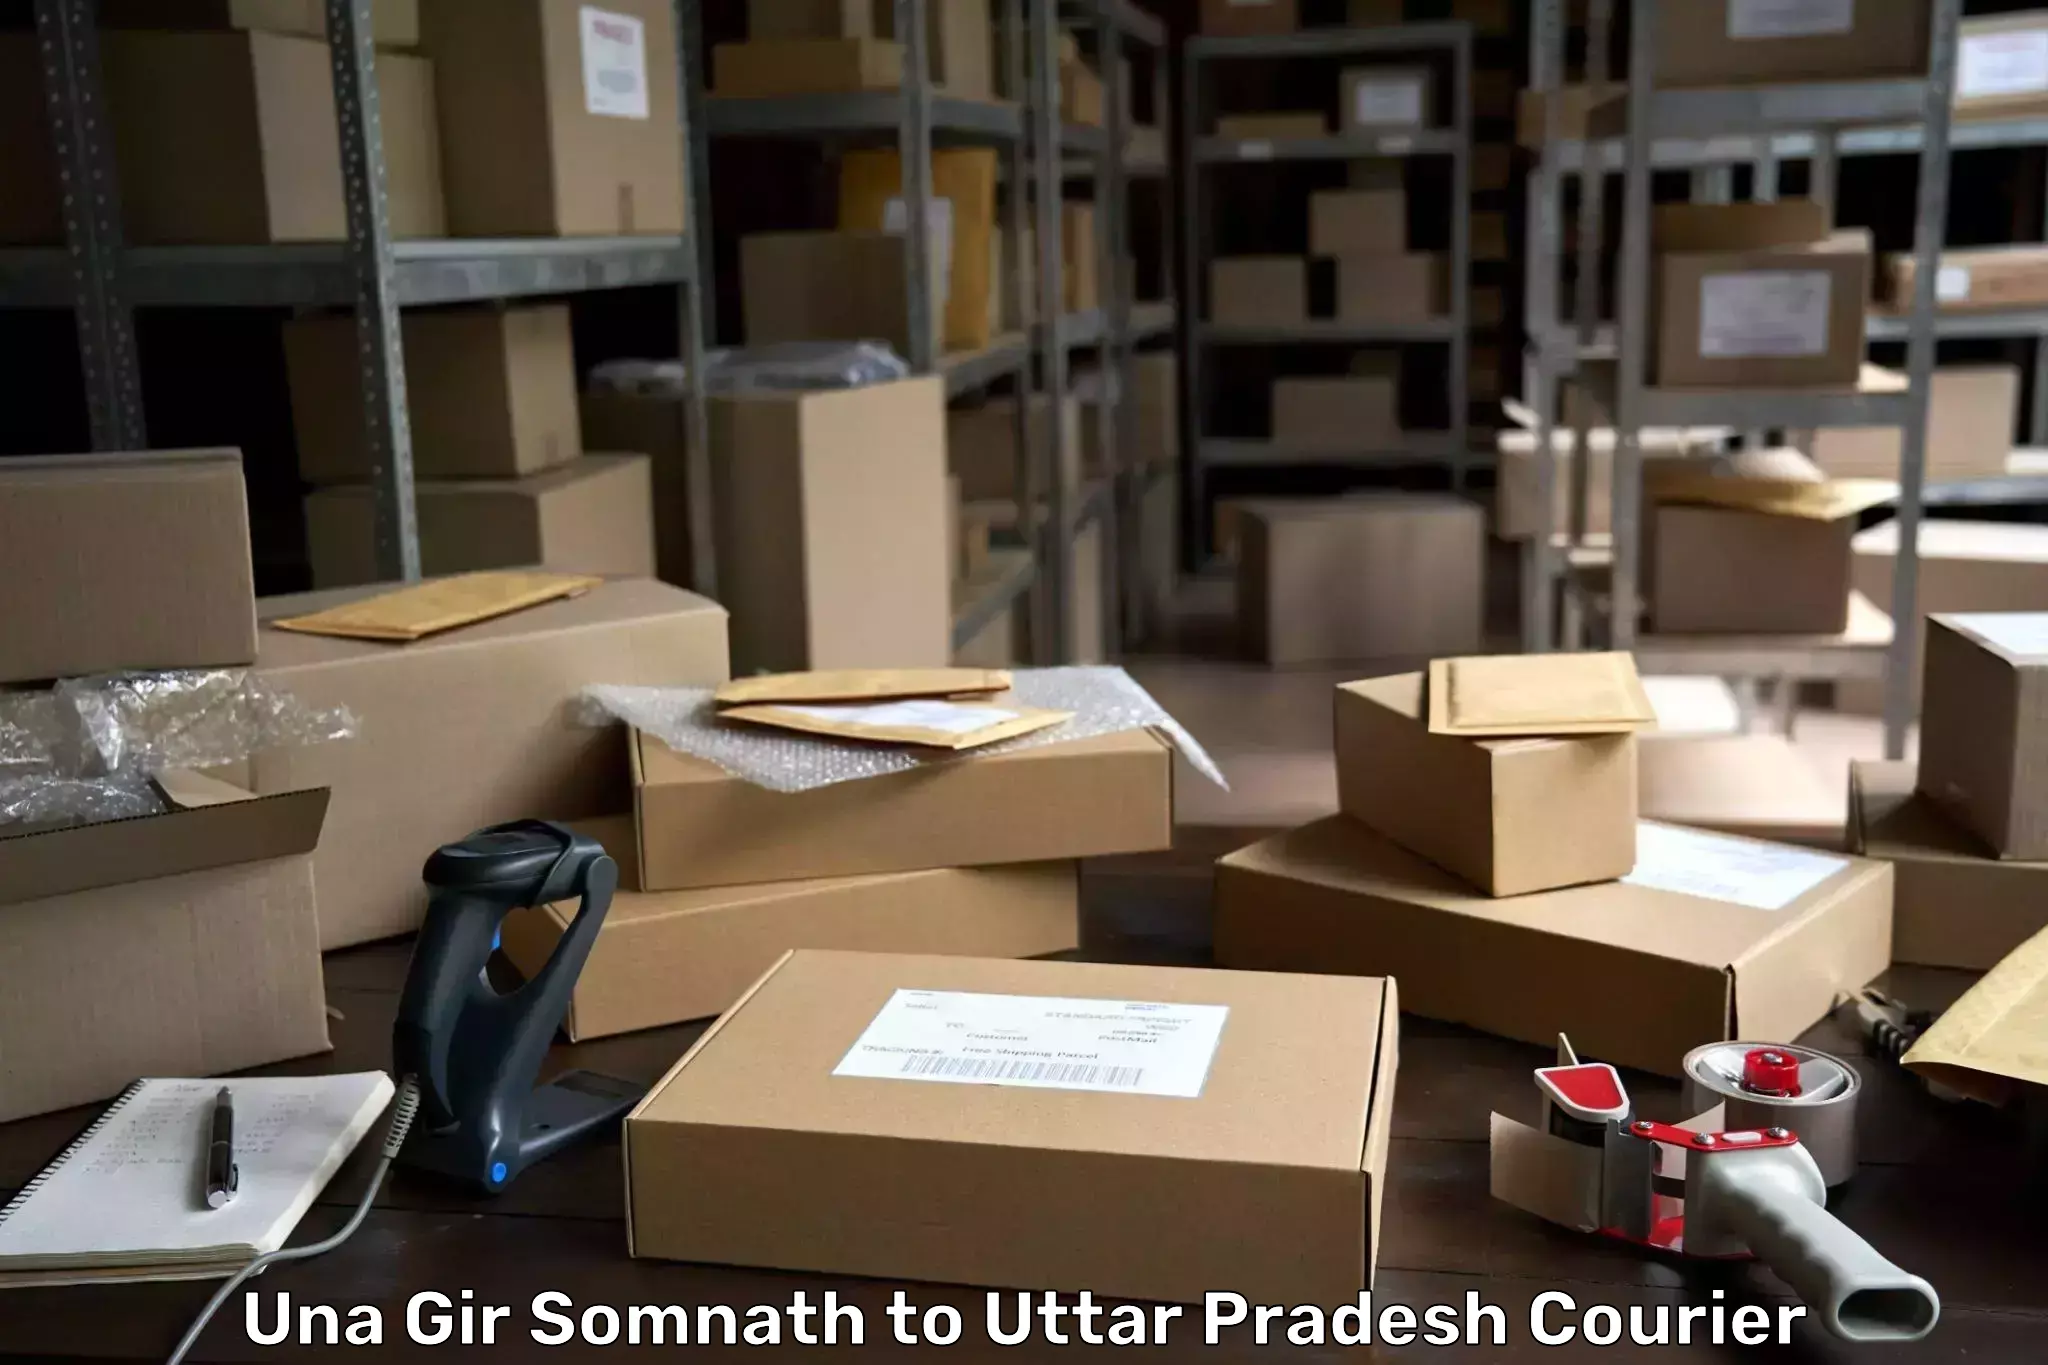 Express package transport Una Gir Somnath to Agra